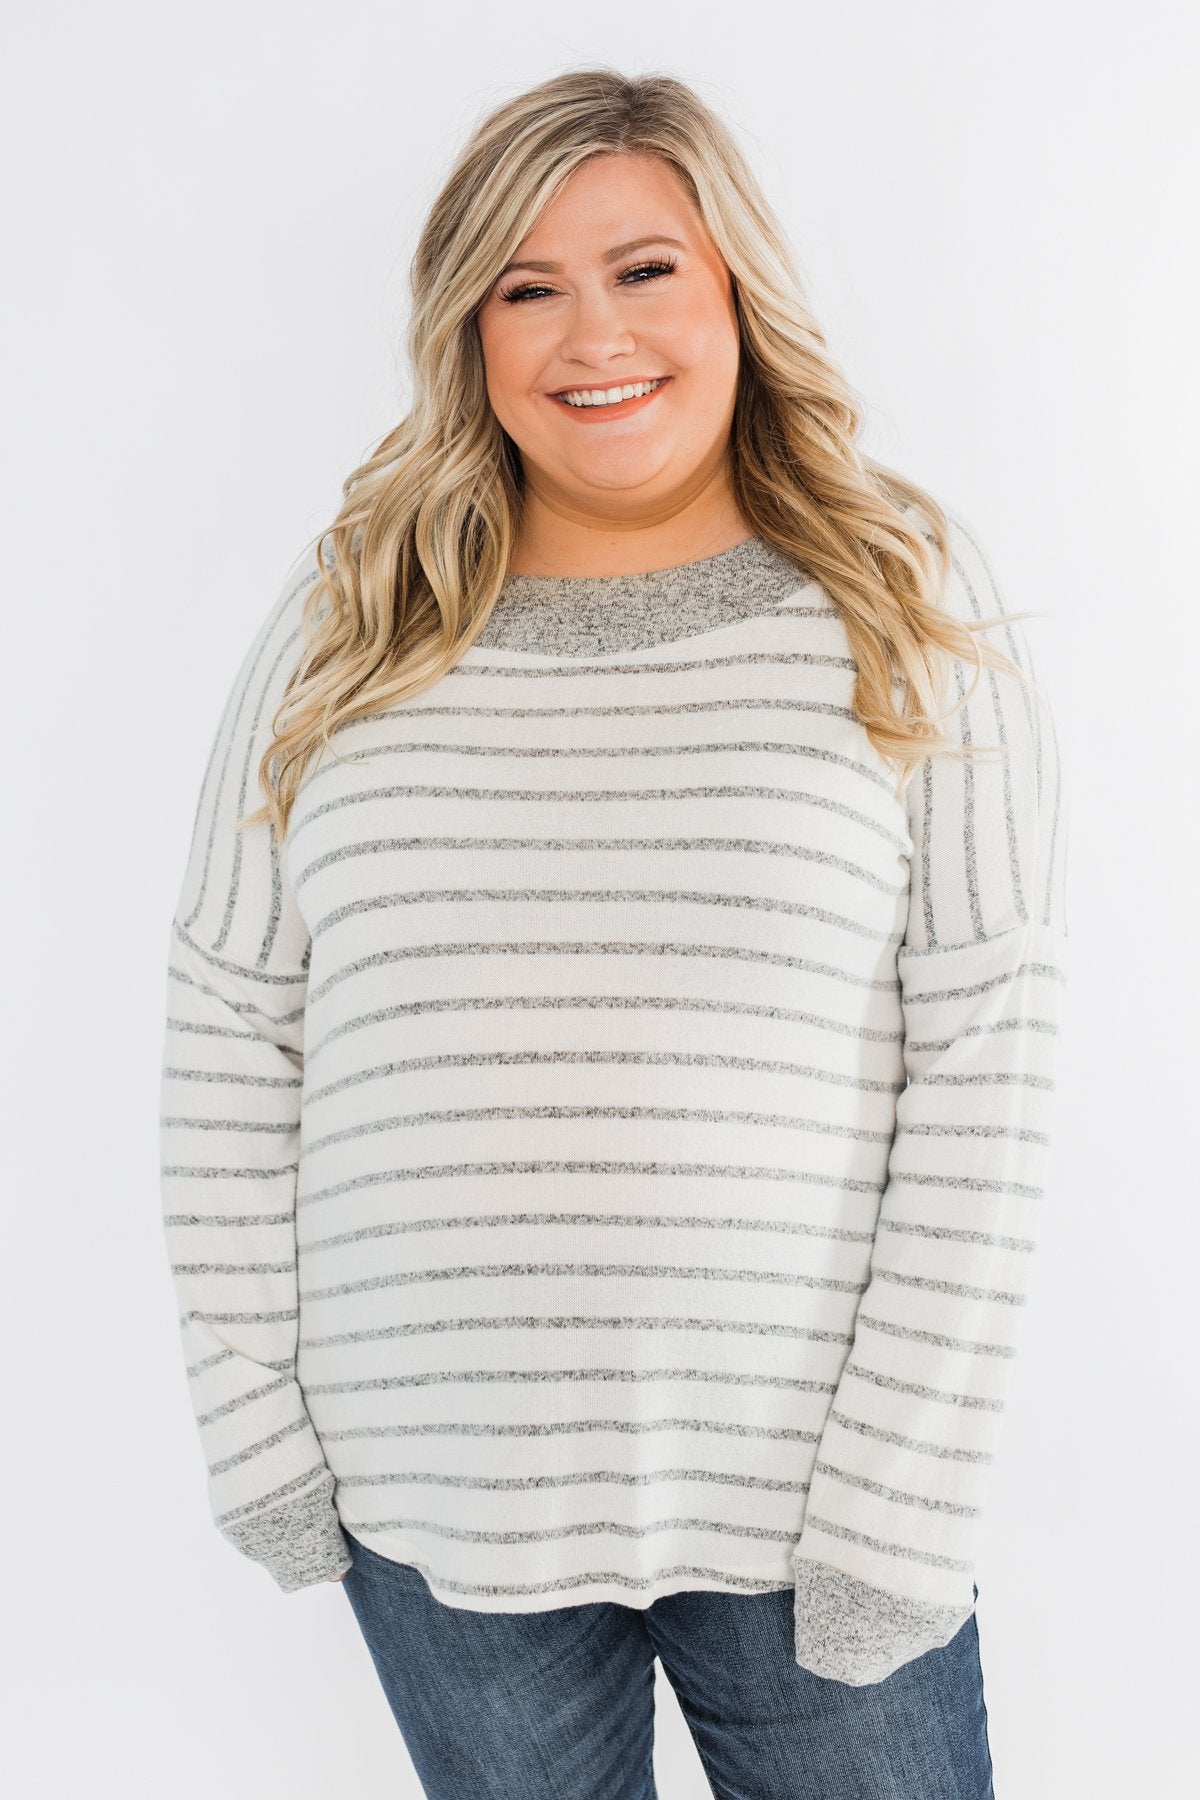 Sight For Sore Eyes Striped Top- Ivory & Grey